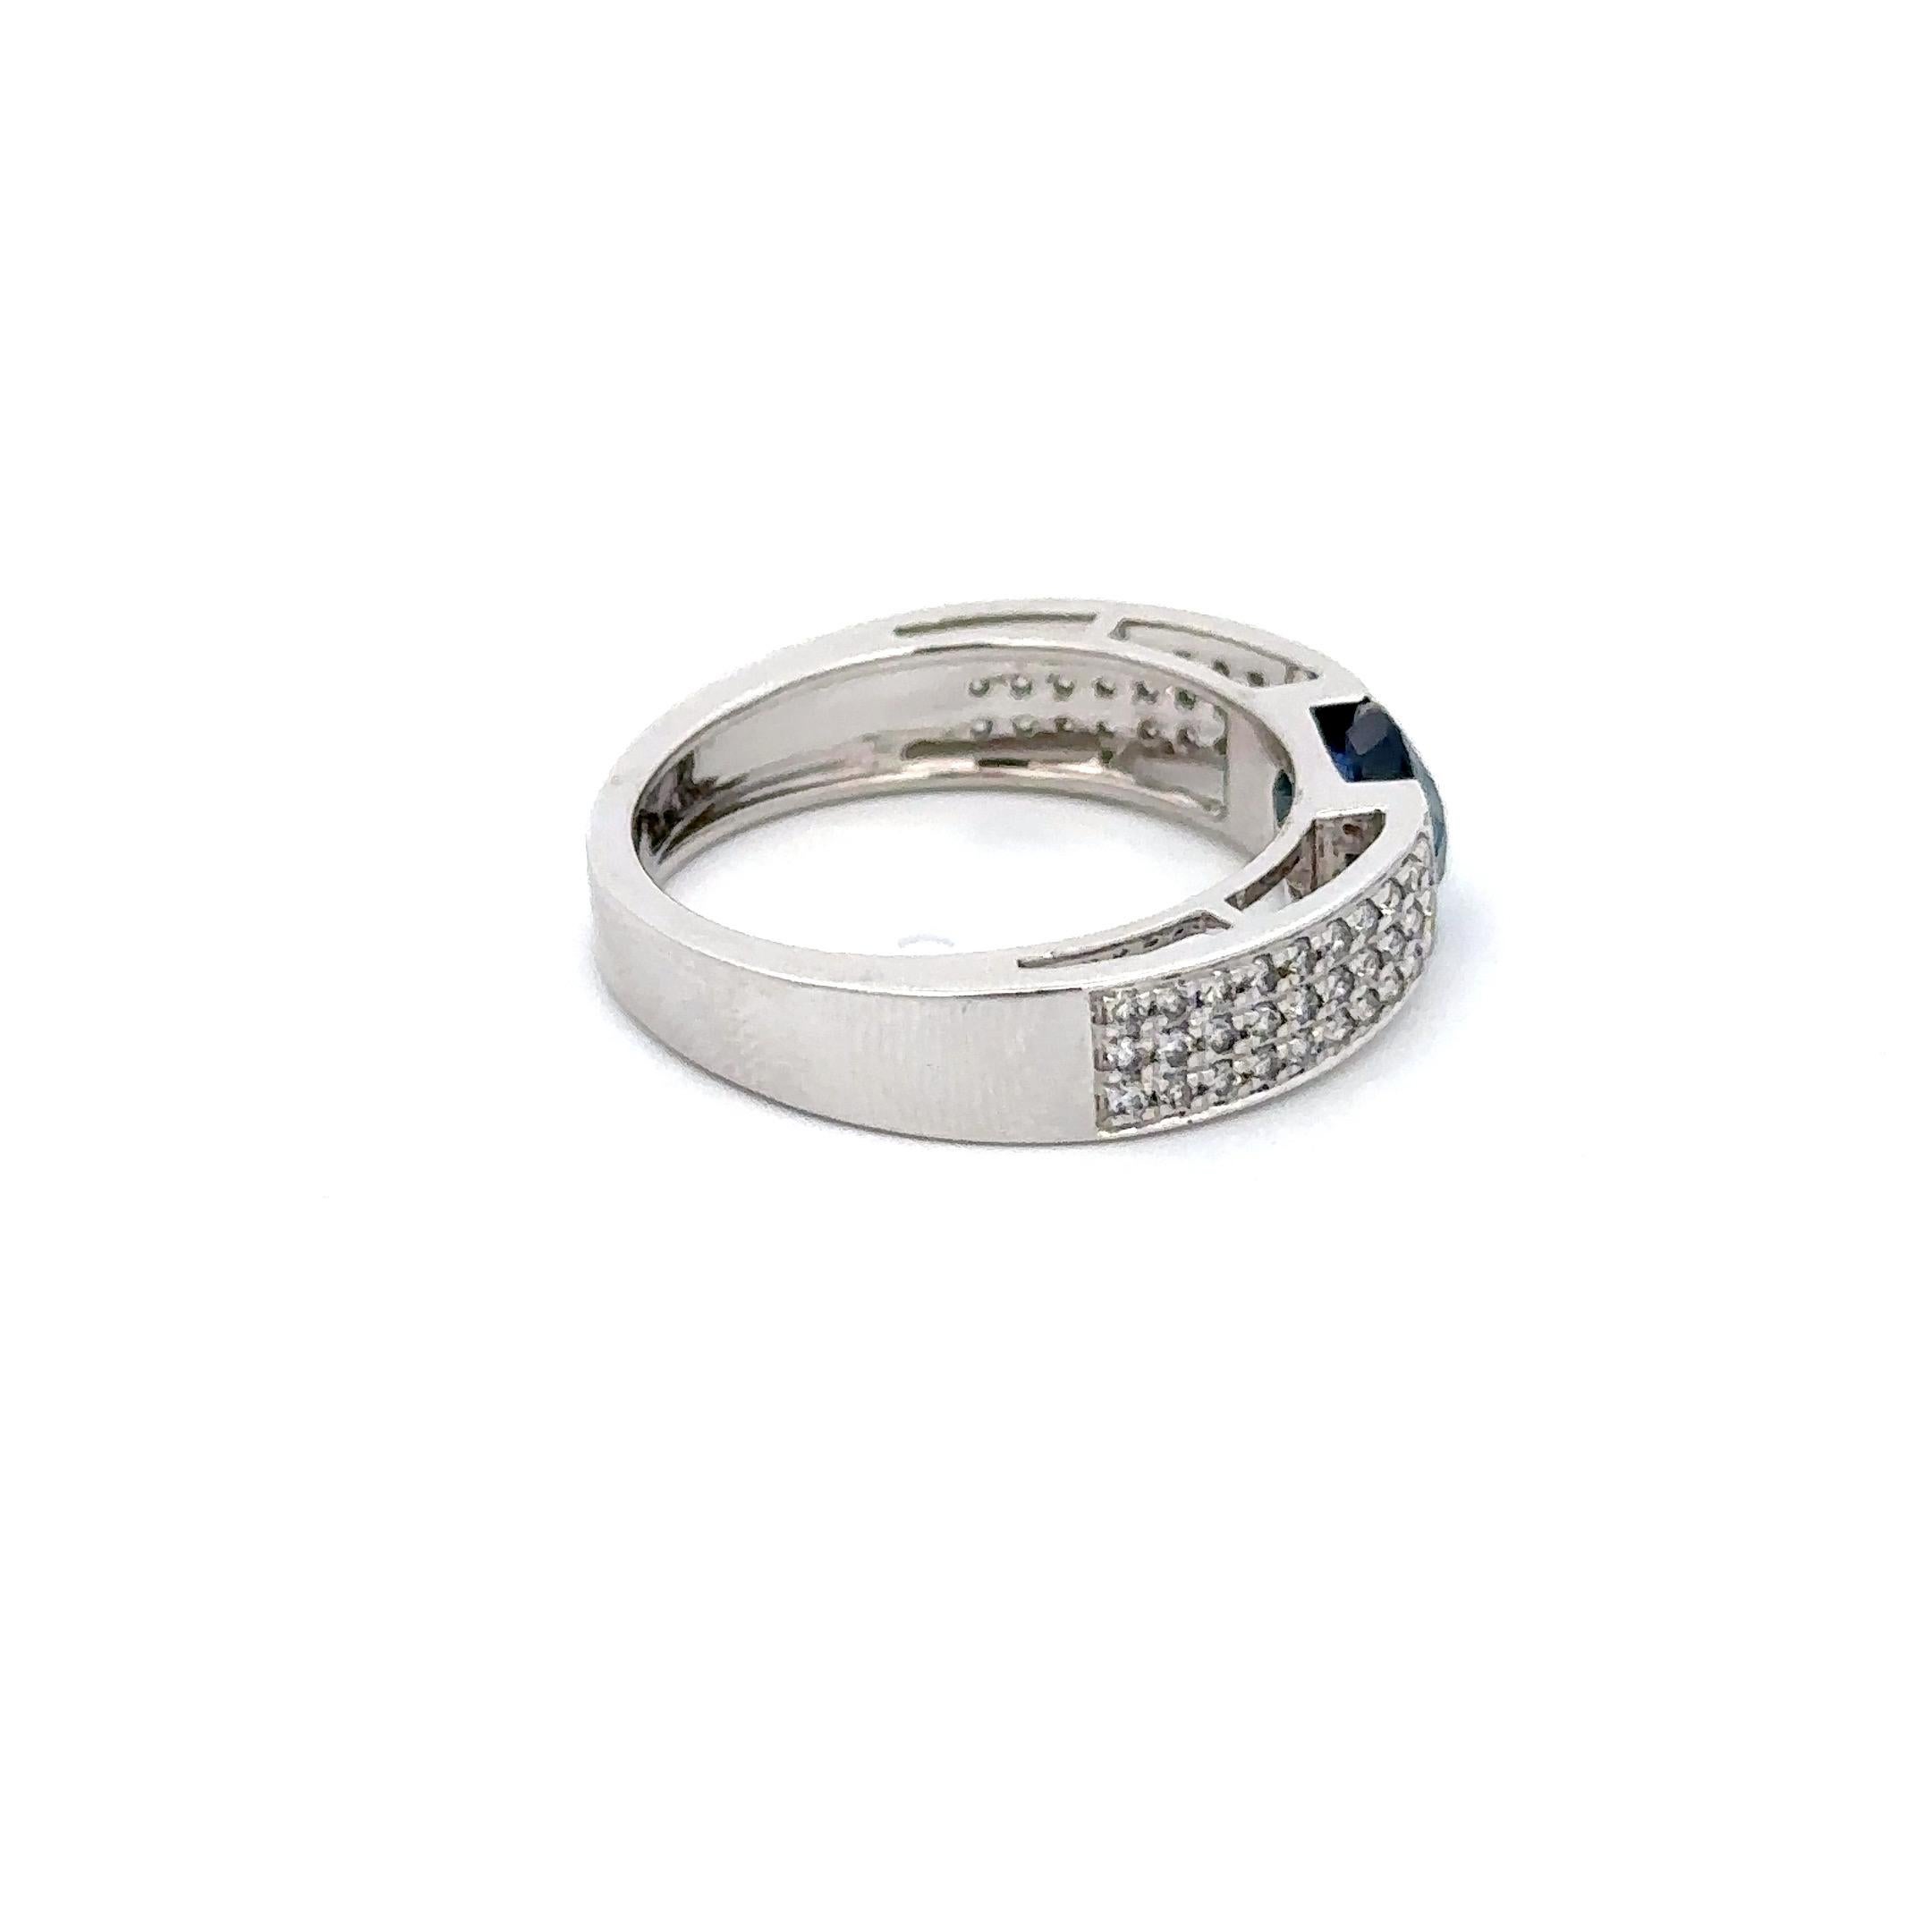 For Sale:  Unisex Diamond and Genuine Sapphire Engagement Band in 18k Solid White Gold 9